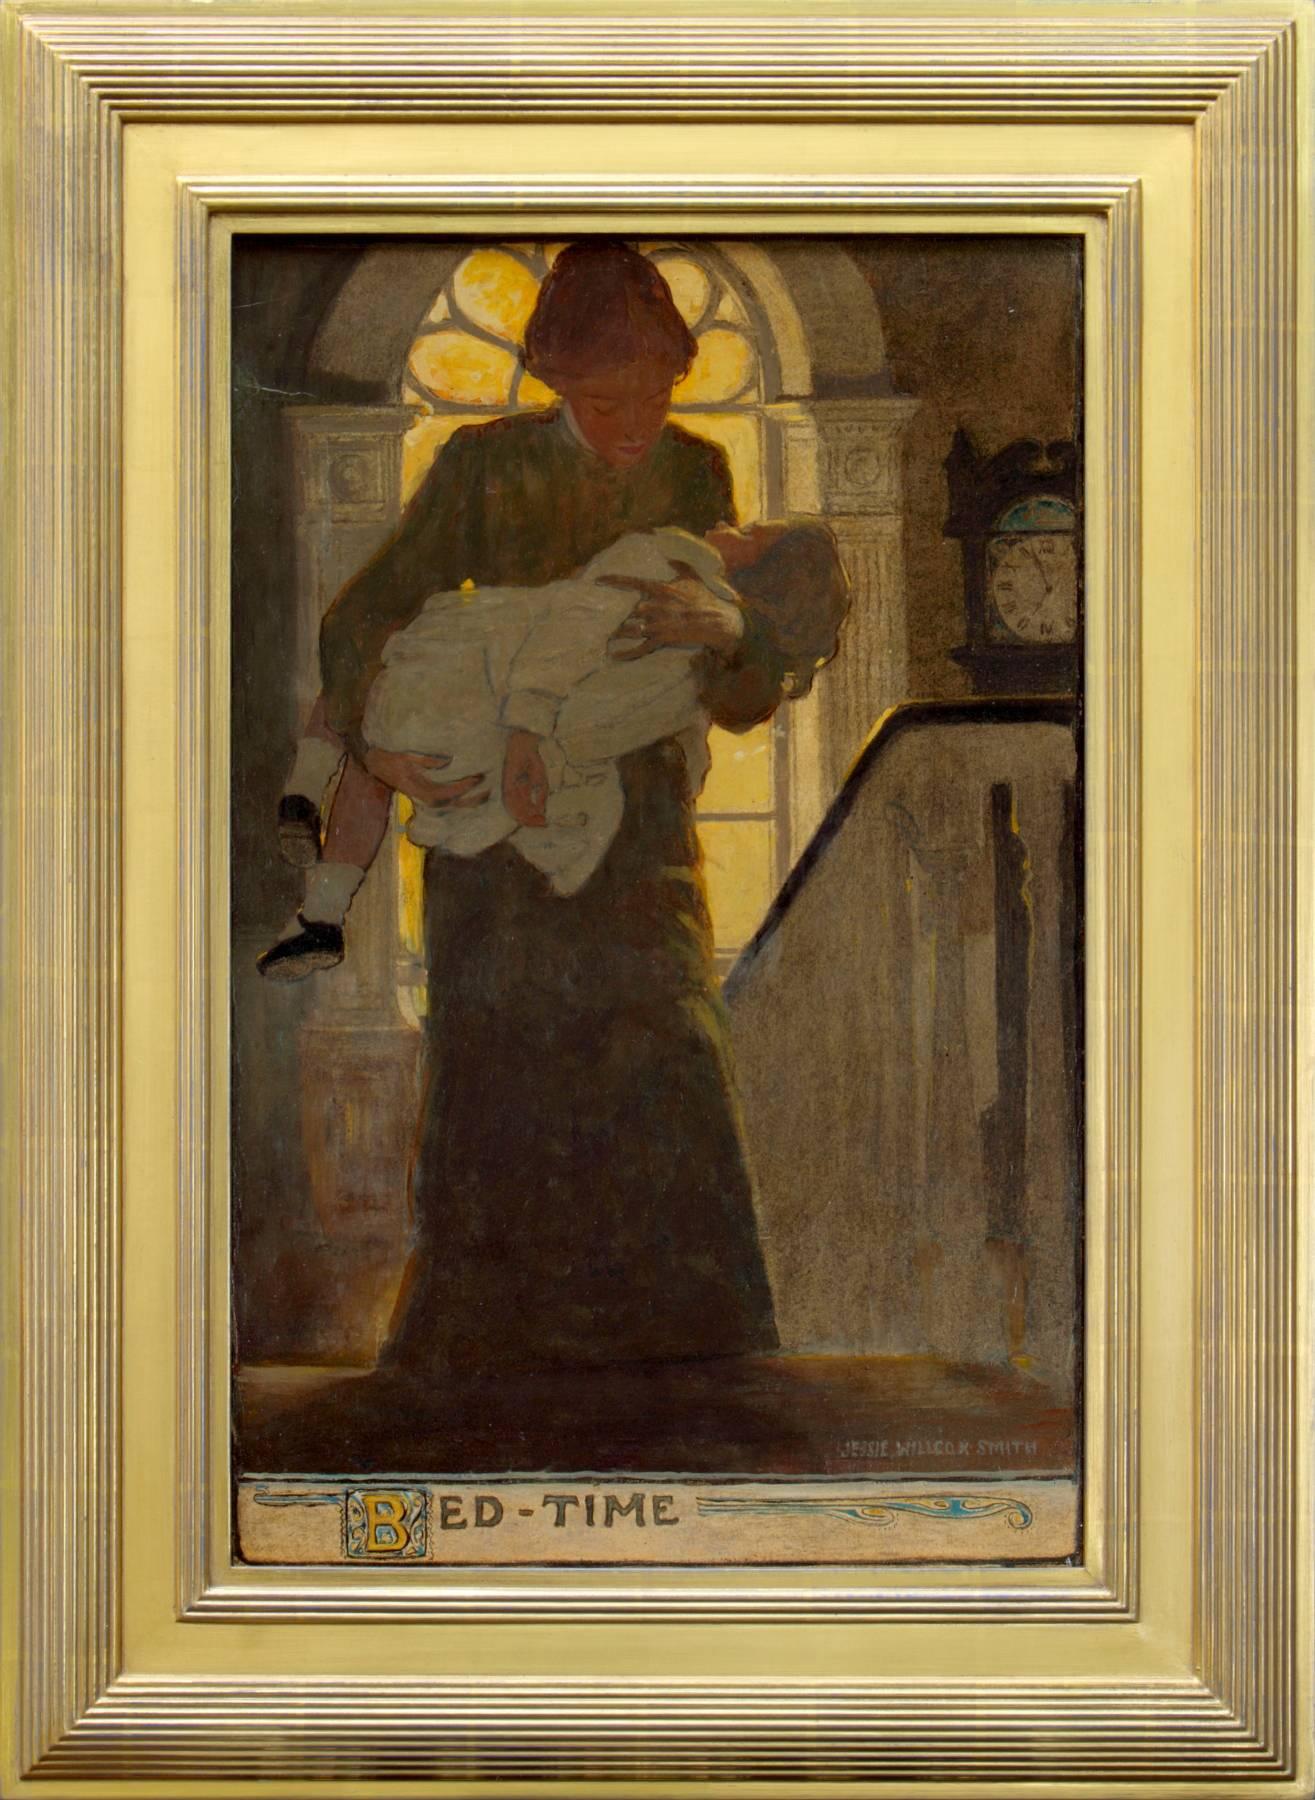 Bed-Time, Scribners Monthly Magazine Illustration - Painting by Jessie Willcox Smith